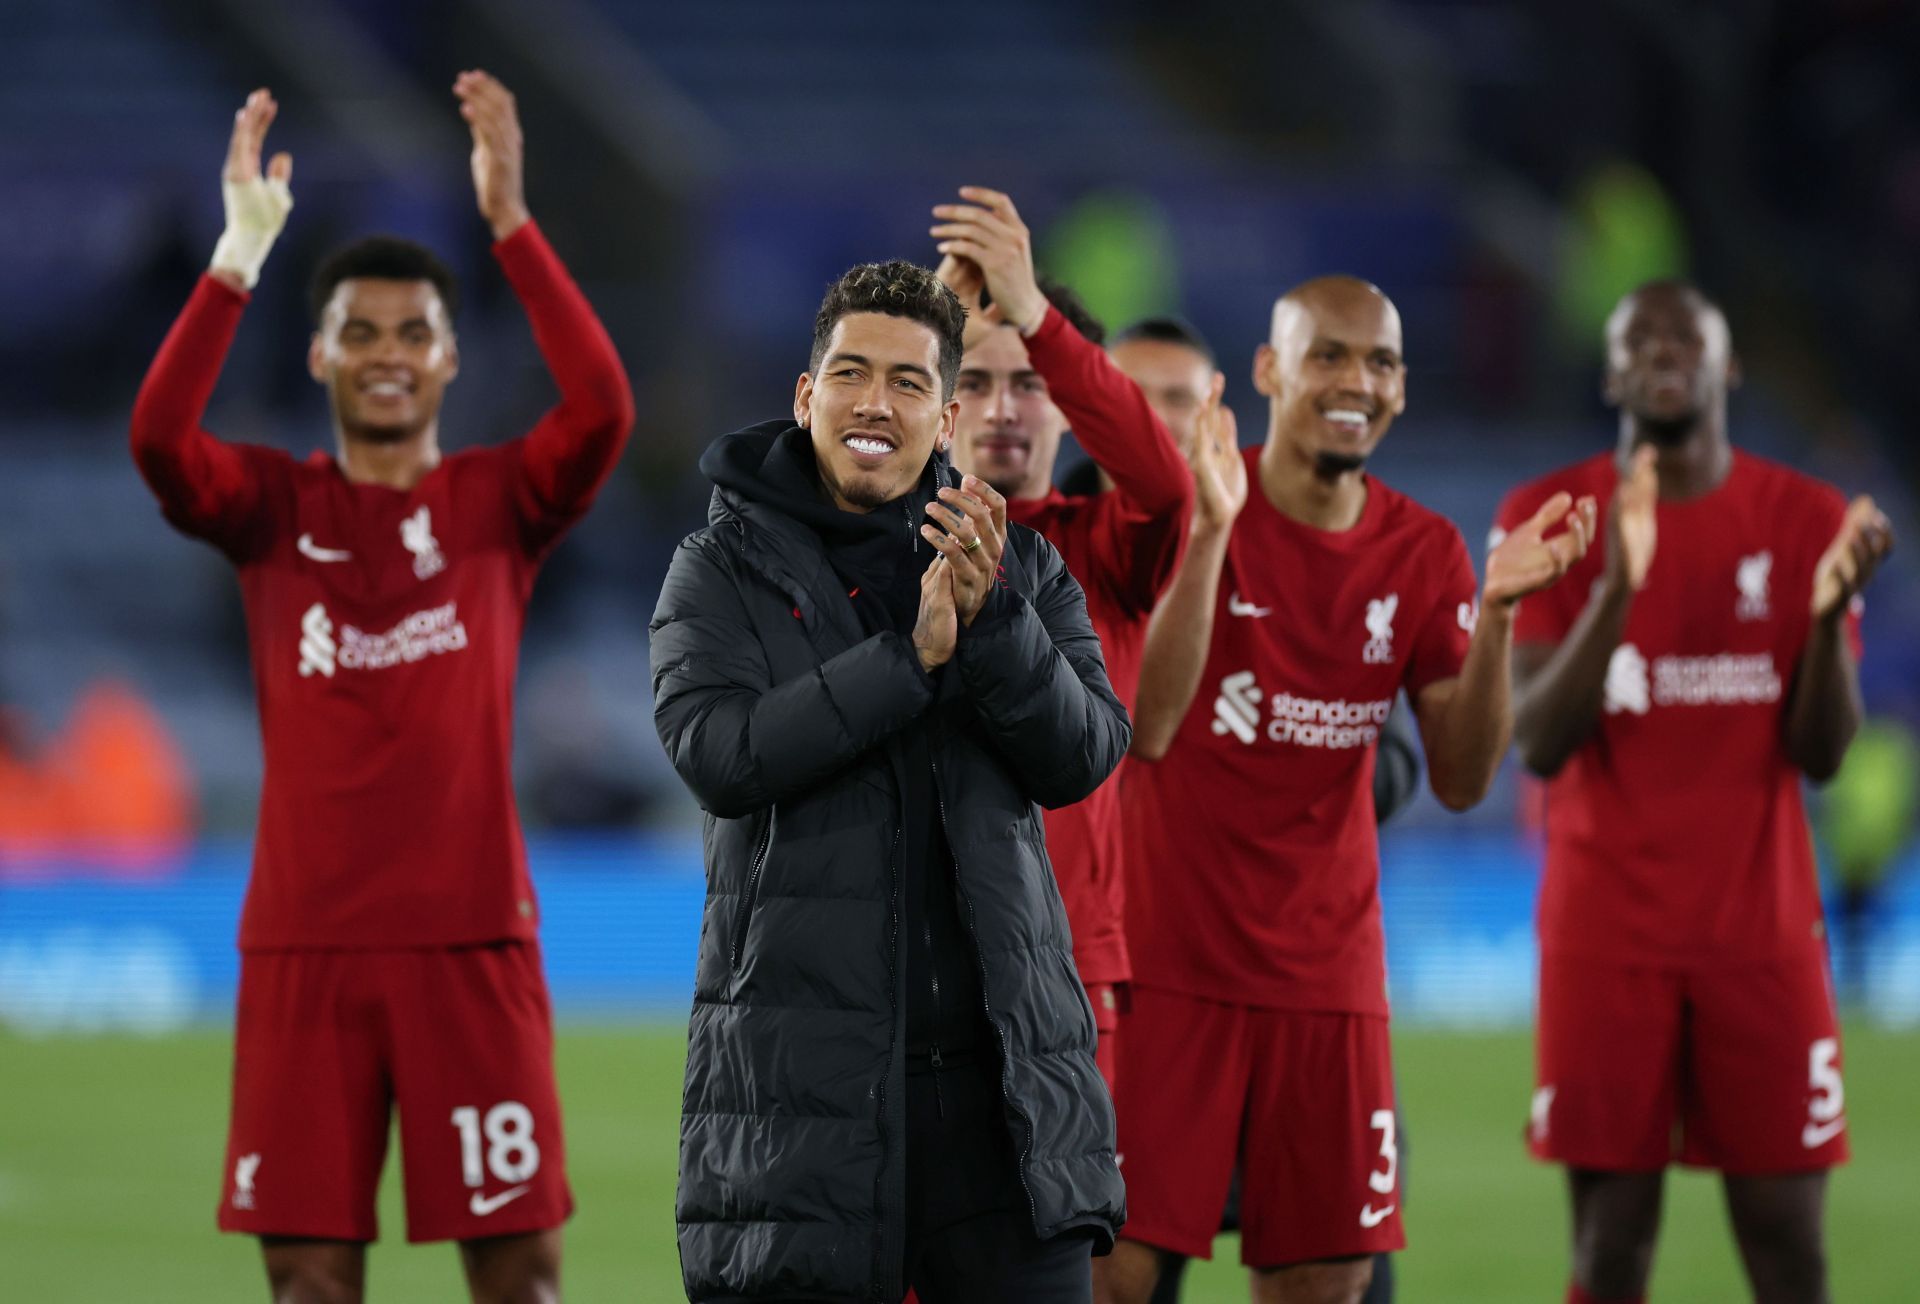 Roberto Firmino will receive a fond farewell from the Liverpool fans